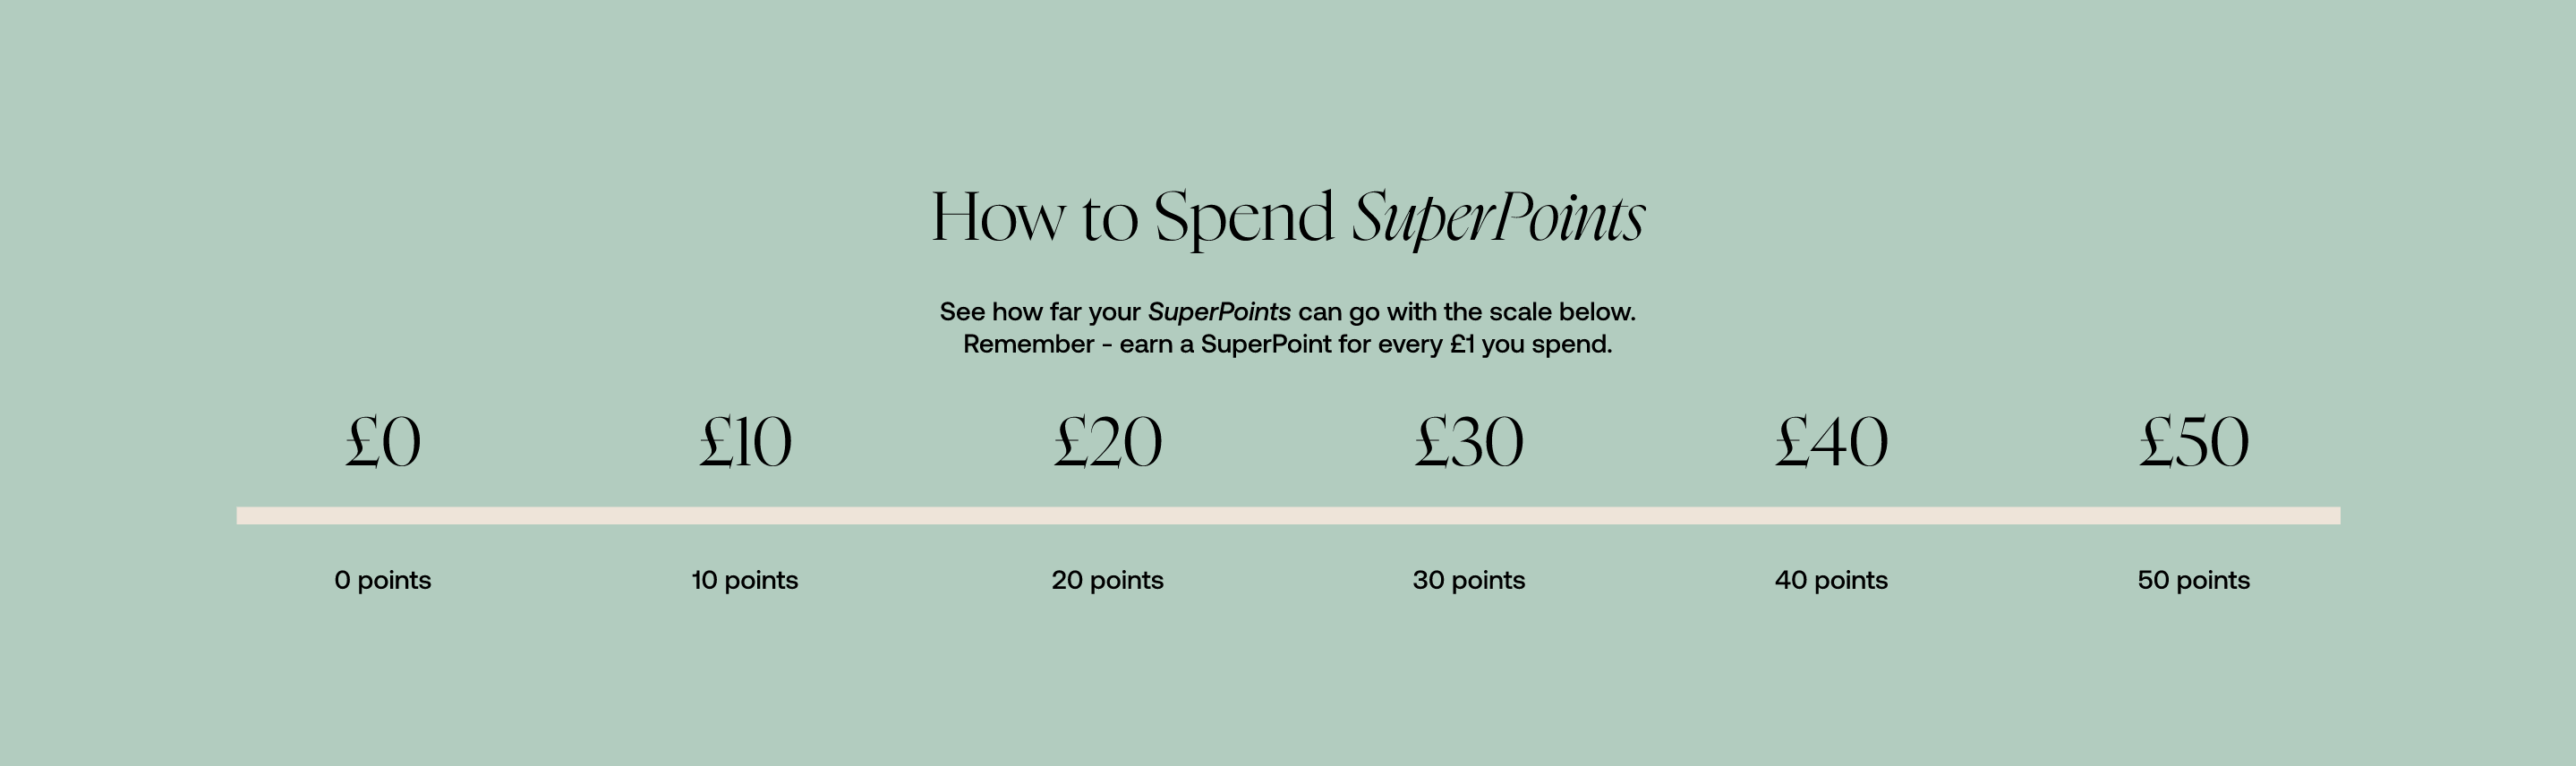 how-to-spend-superpoints